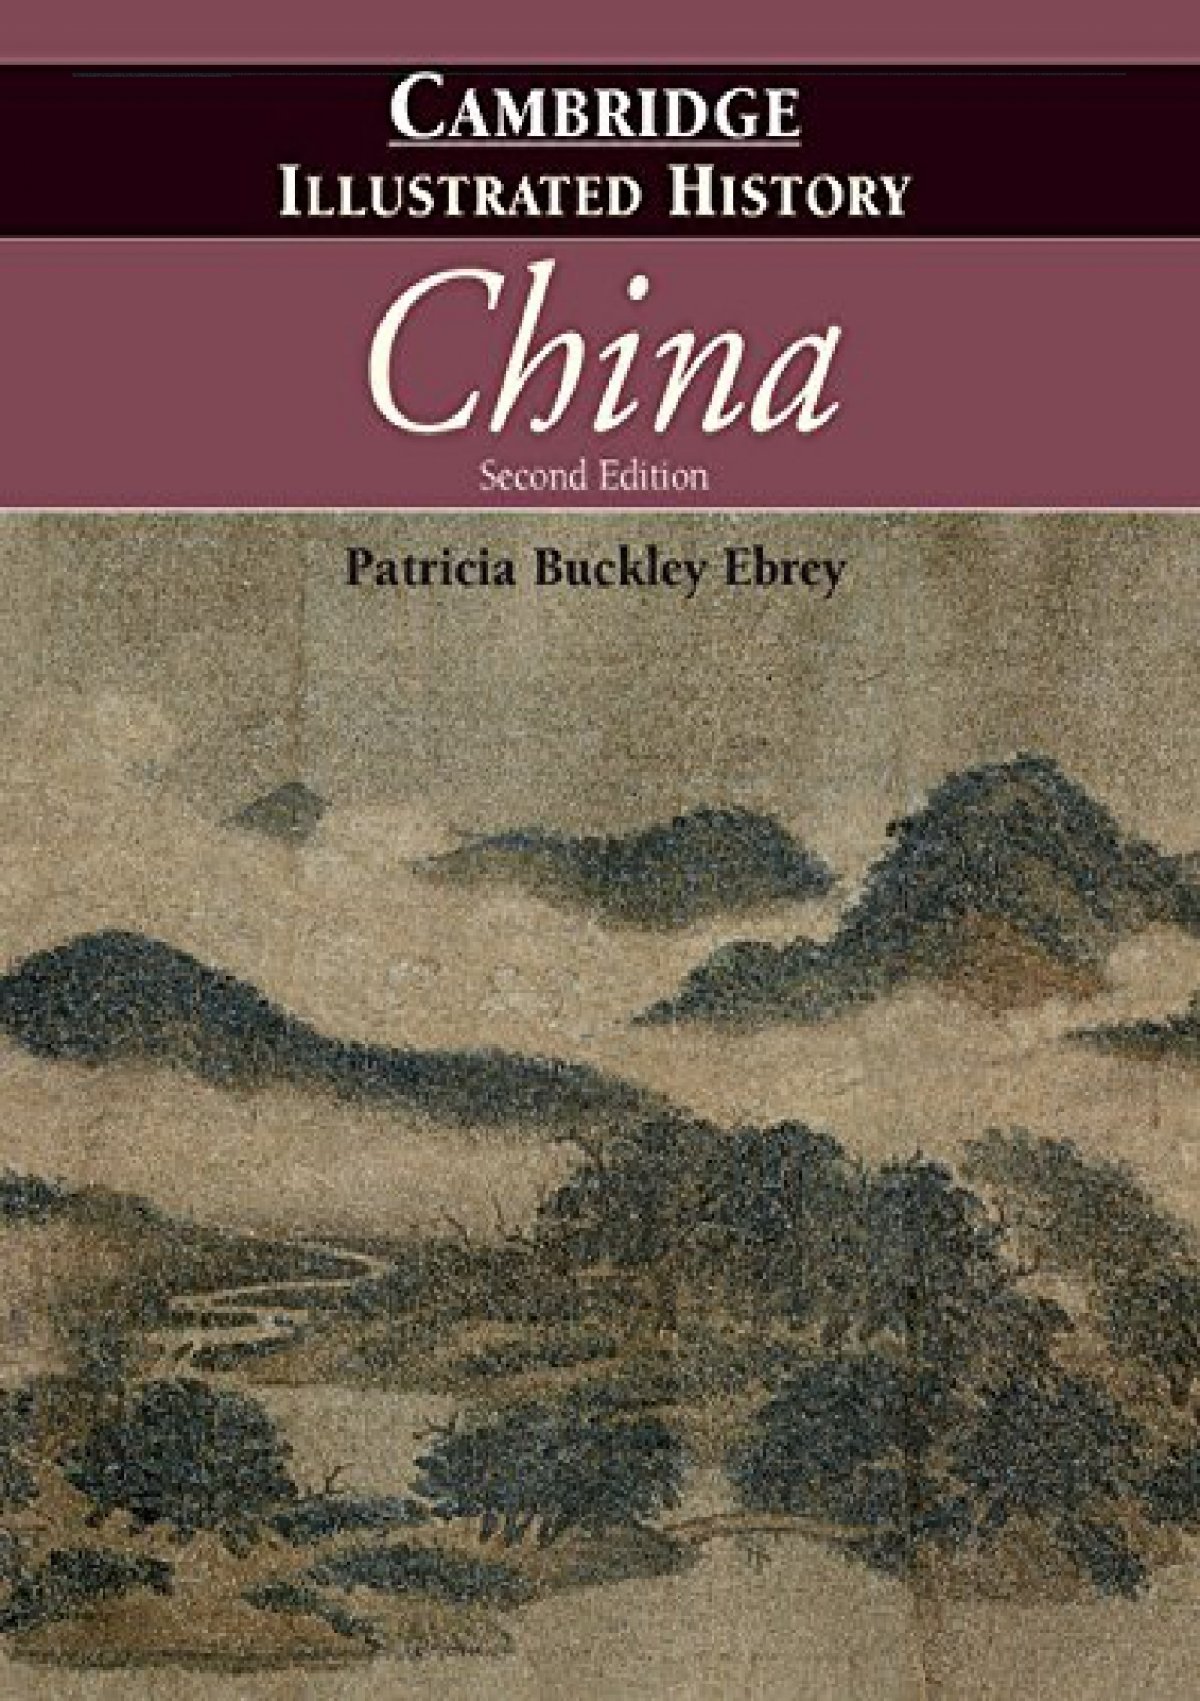 cambridge illustrated history of china pdf download